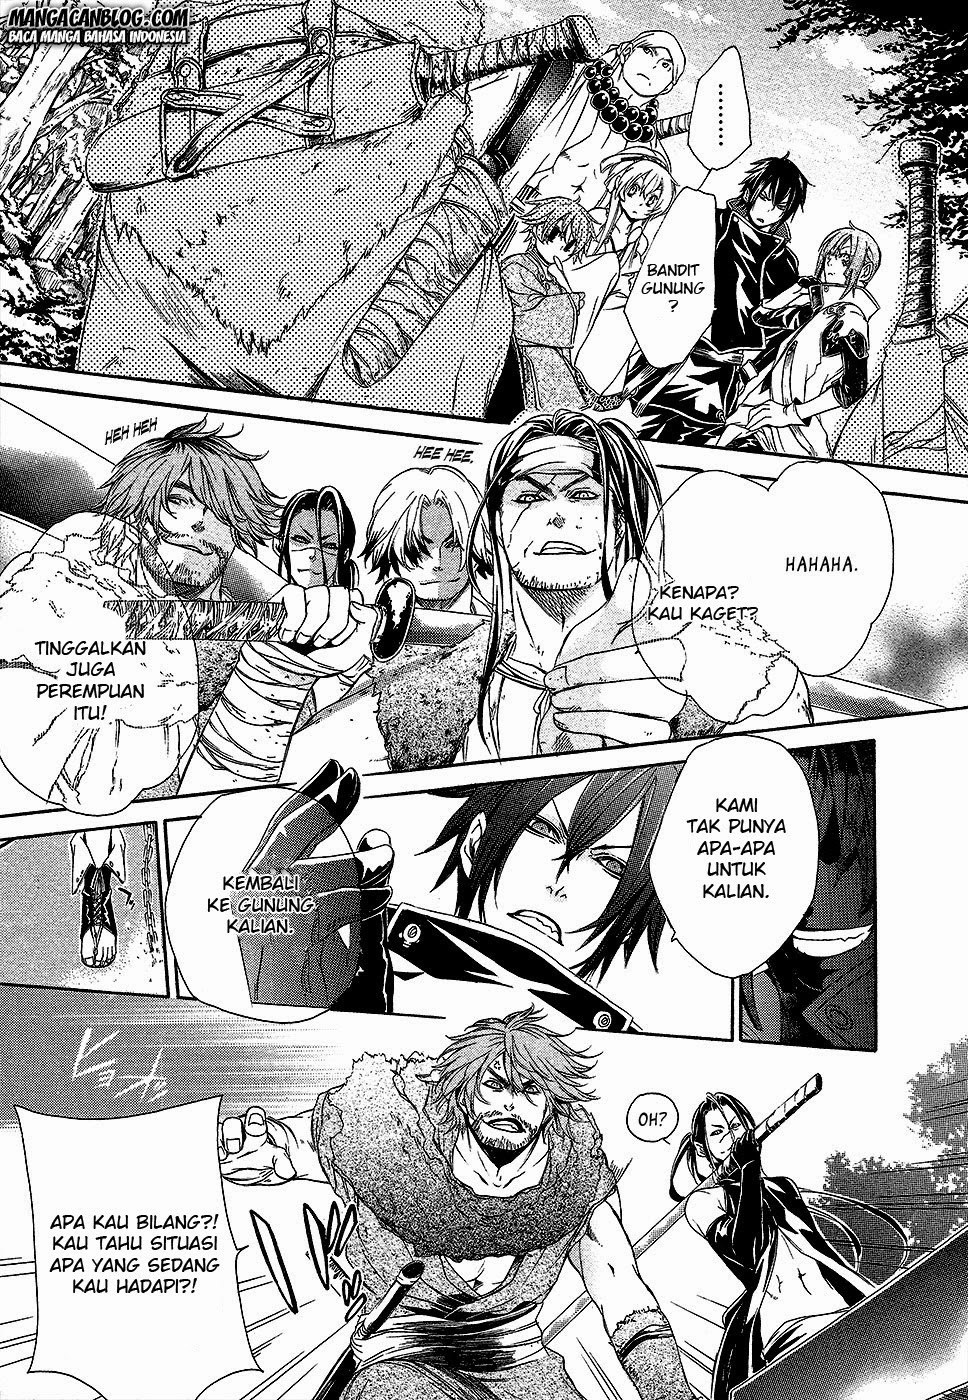 Brave 10 S Chapter 1